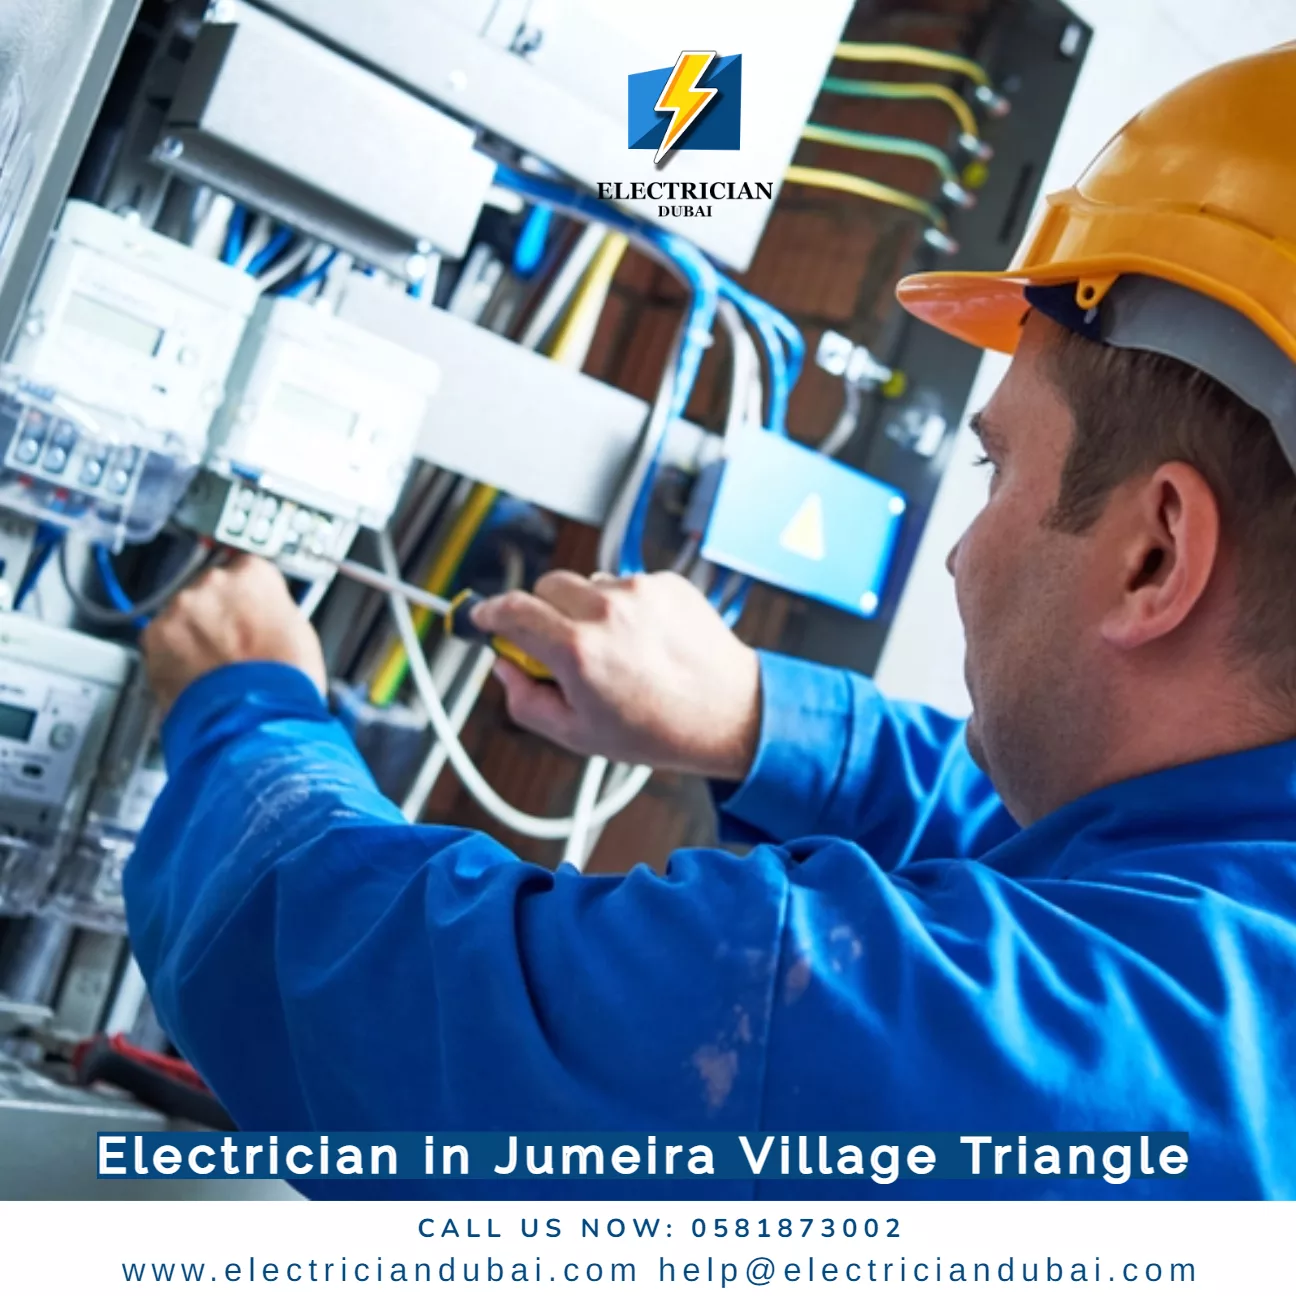 Electrician in Jumeira Village Triangle